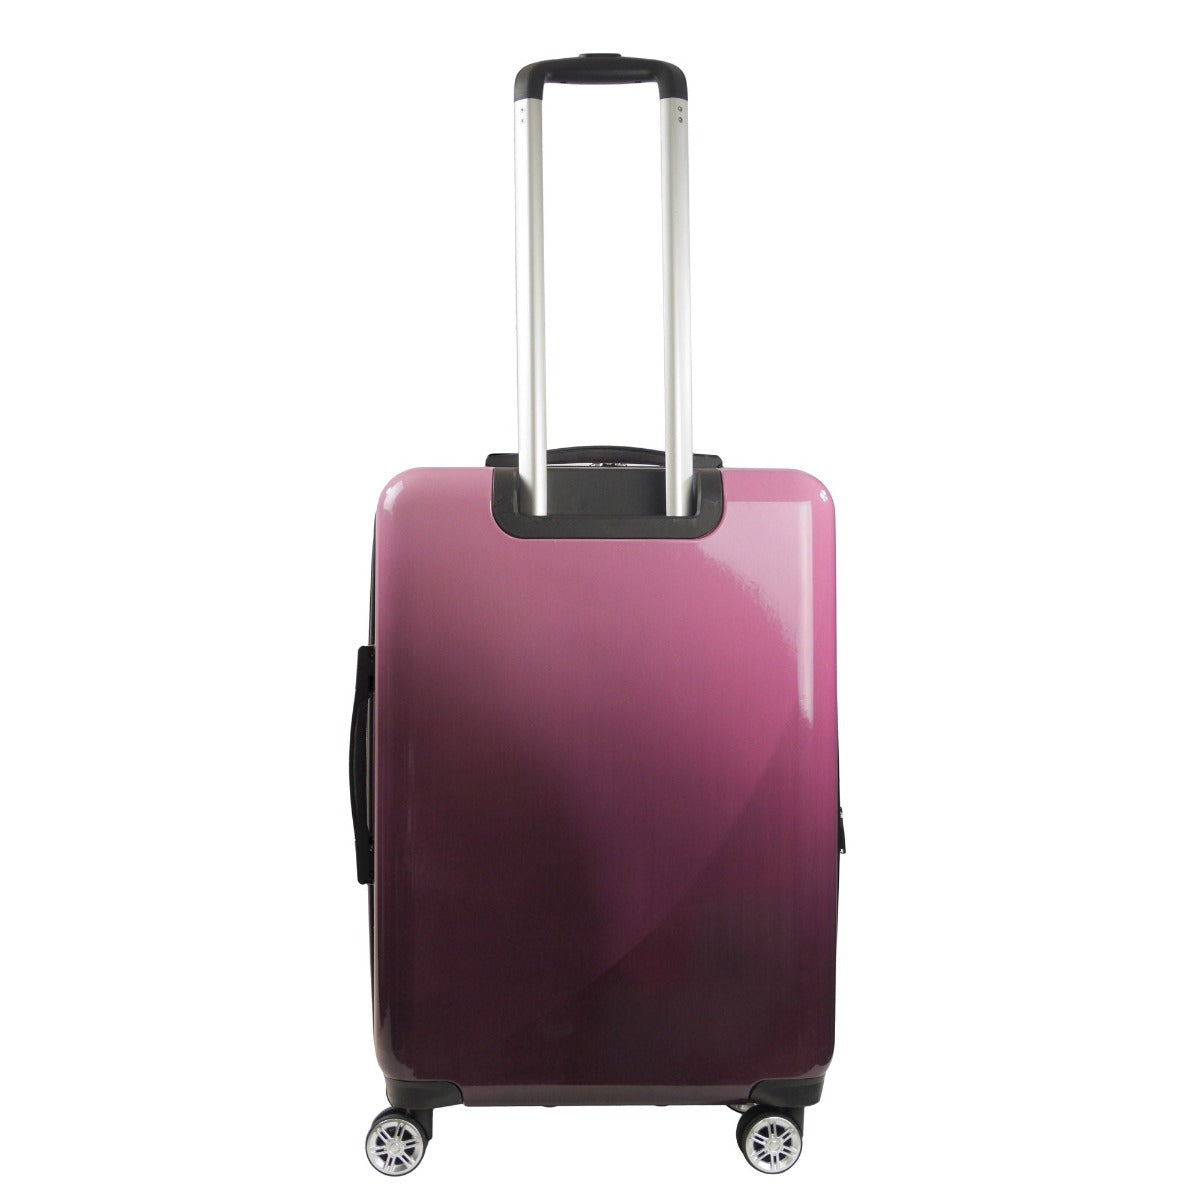 Ful Impulse Ombre Hardside Suitcase 26" Luggage Pink Purple Fade 360° spinner wheels zipper pocket 2" expansion